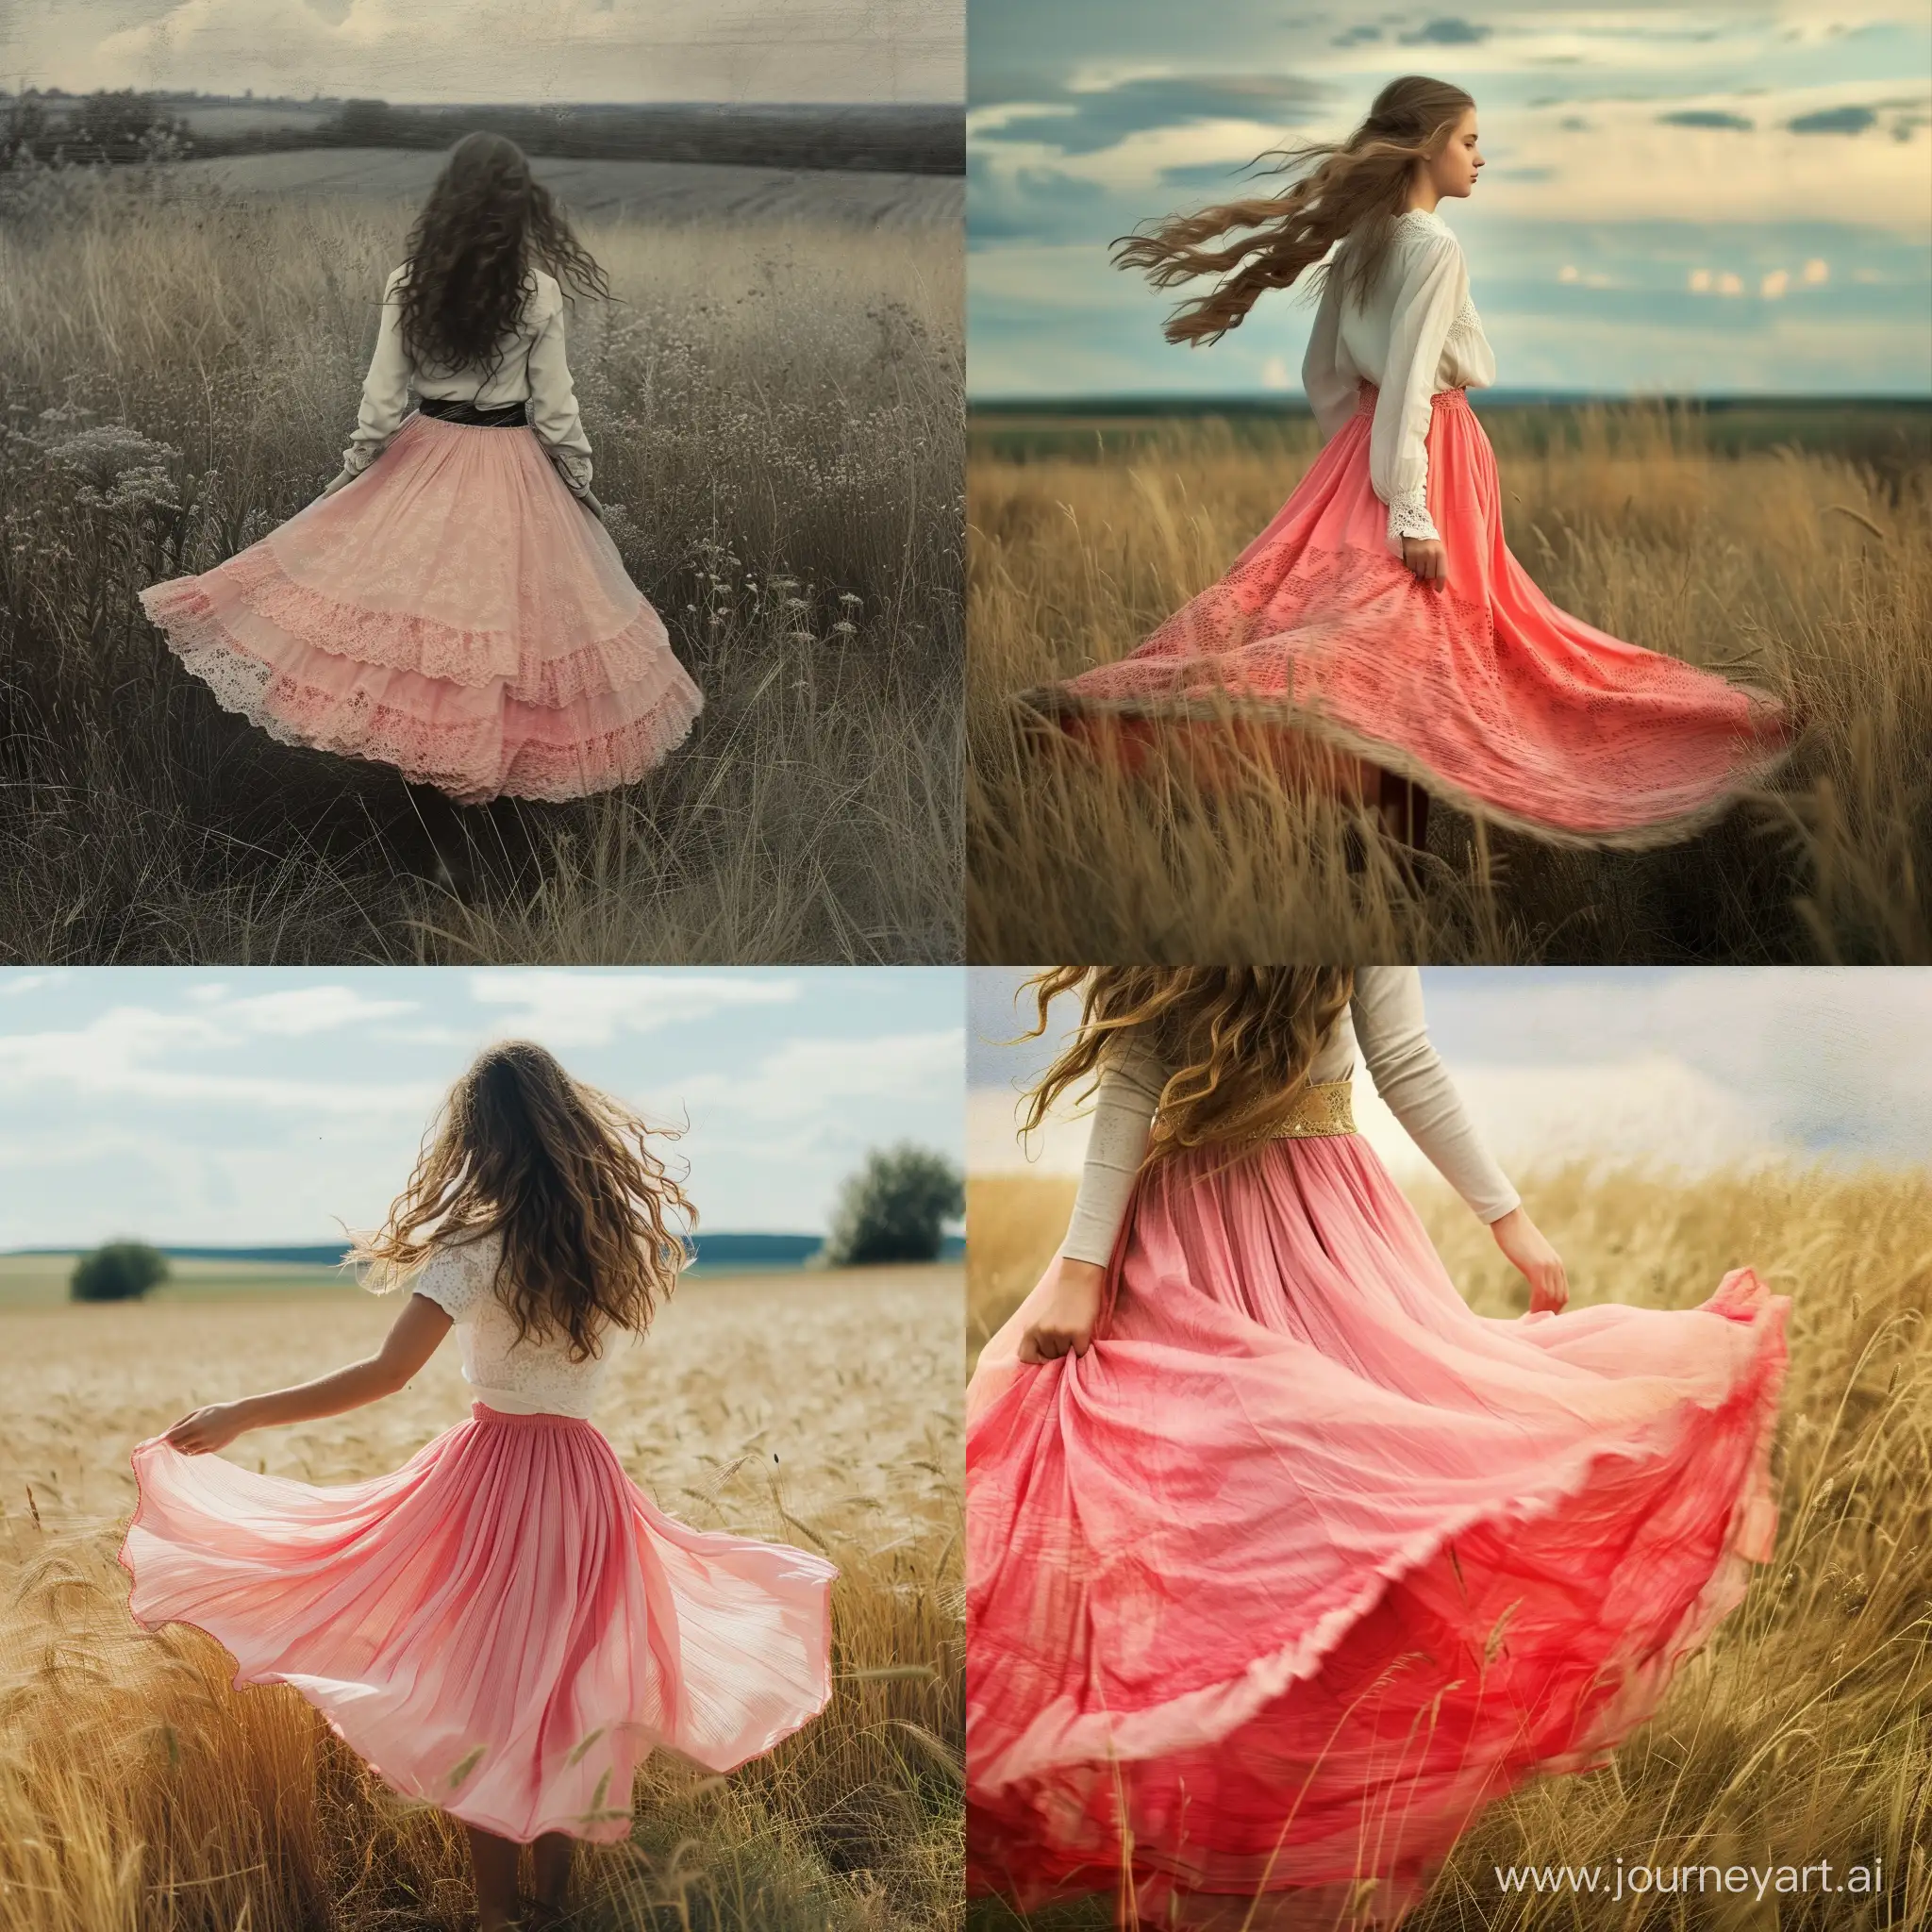 Graceful-Lady-in-Pink-Skirt-Posing-Amidst-the-Fields-with-Flowing-Hair